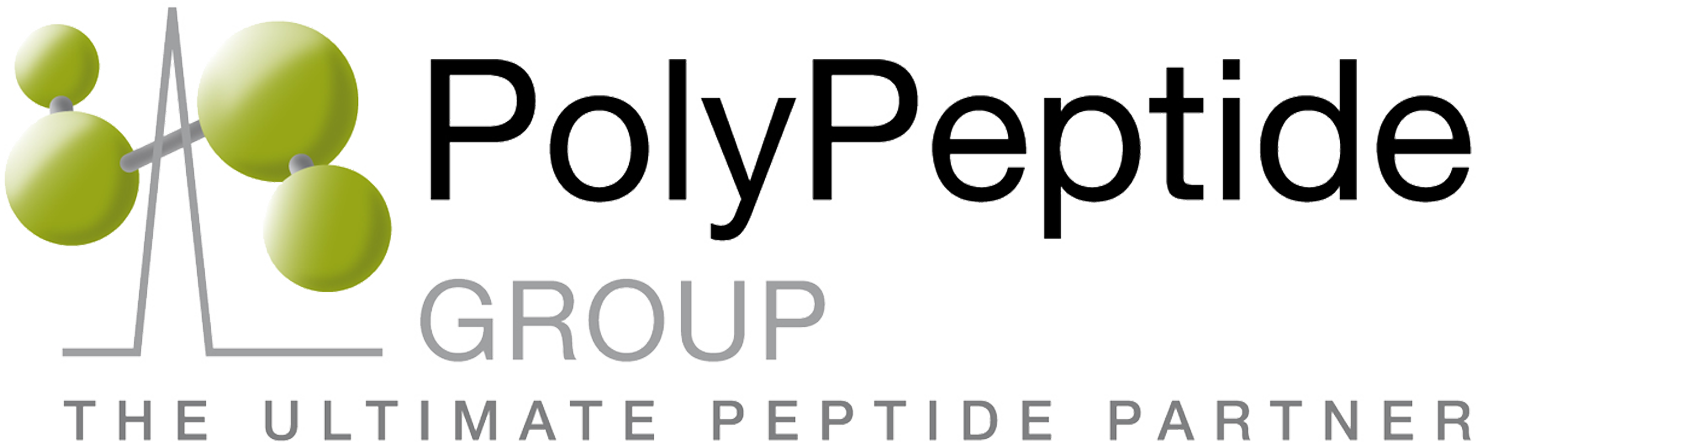 PolyPeptide Group